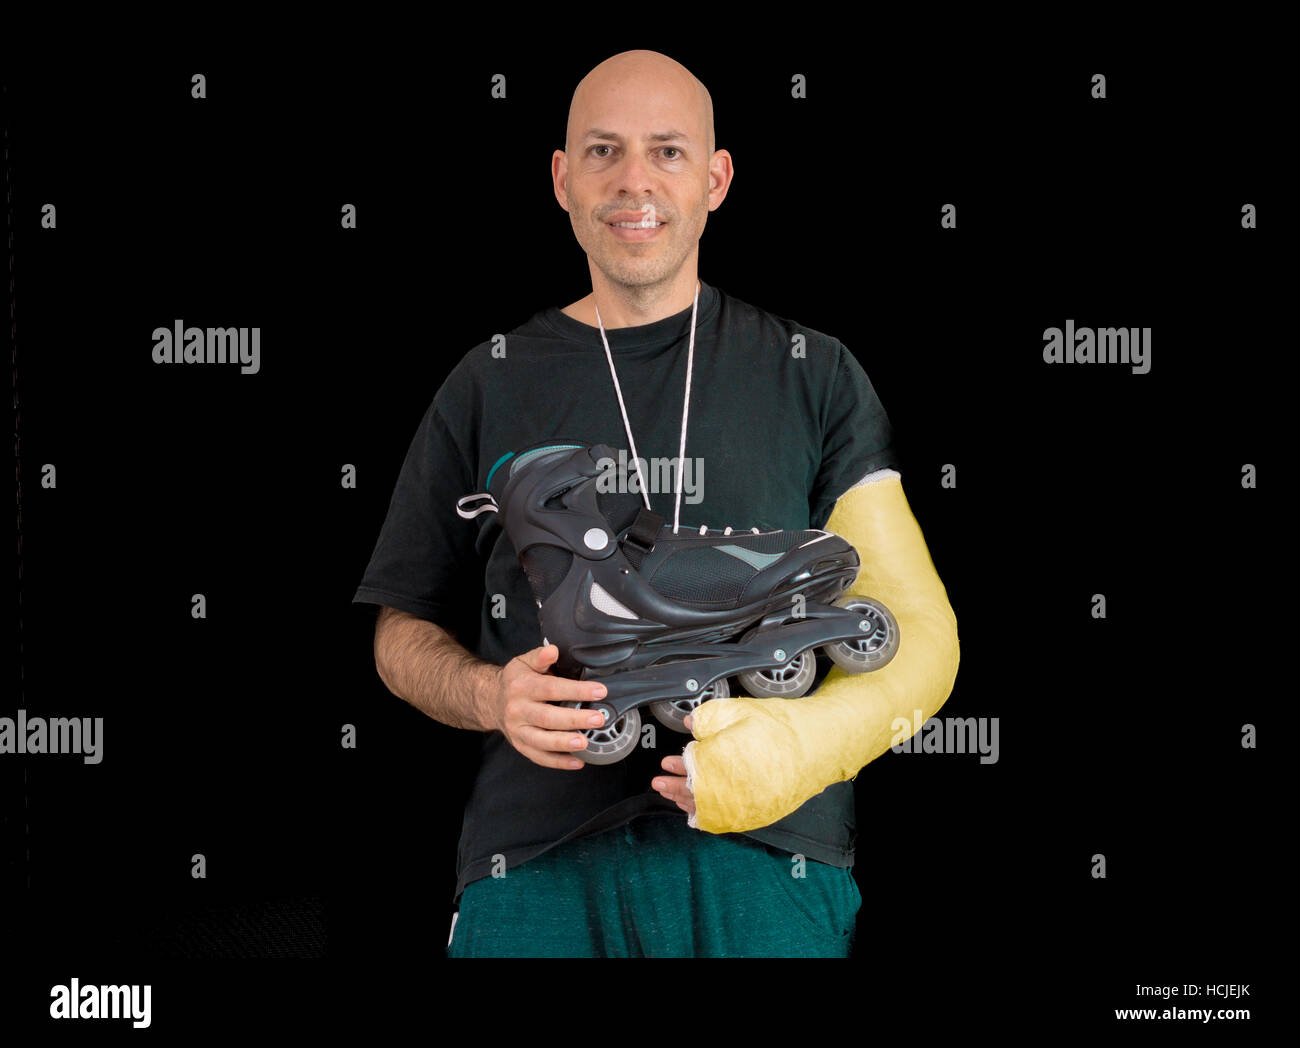 Young man sporting a bright yellow arm cast, holding an inline skate after a breaking his arm in a rollerblading accident, isolated on black Stock Photo